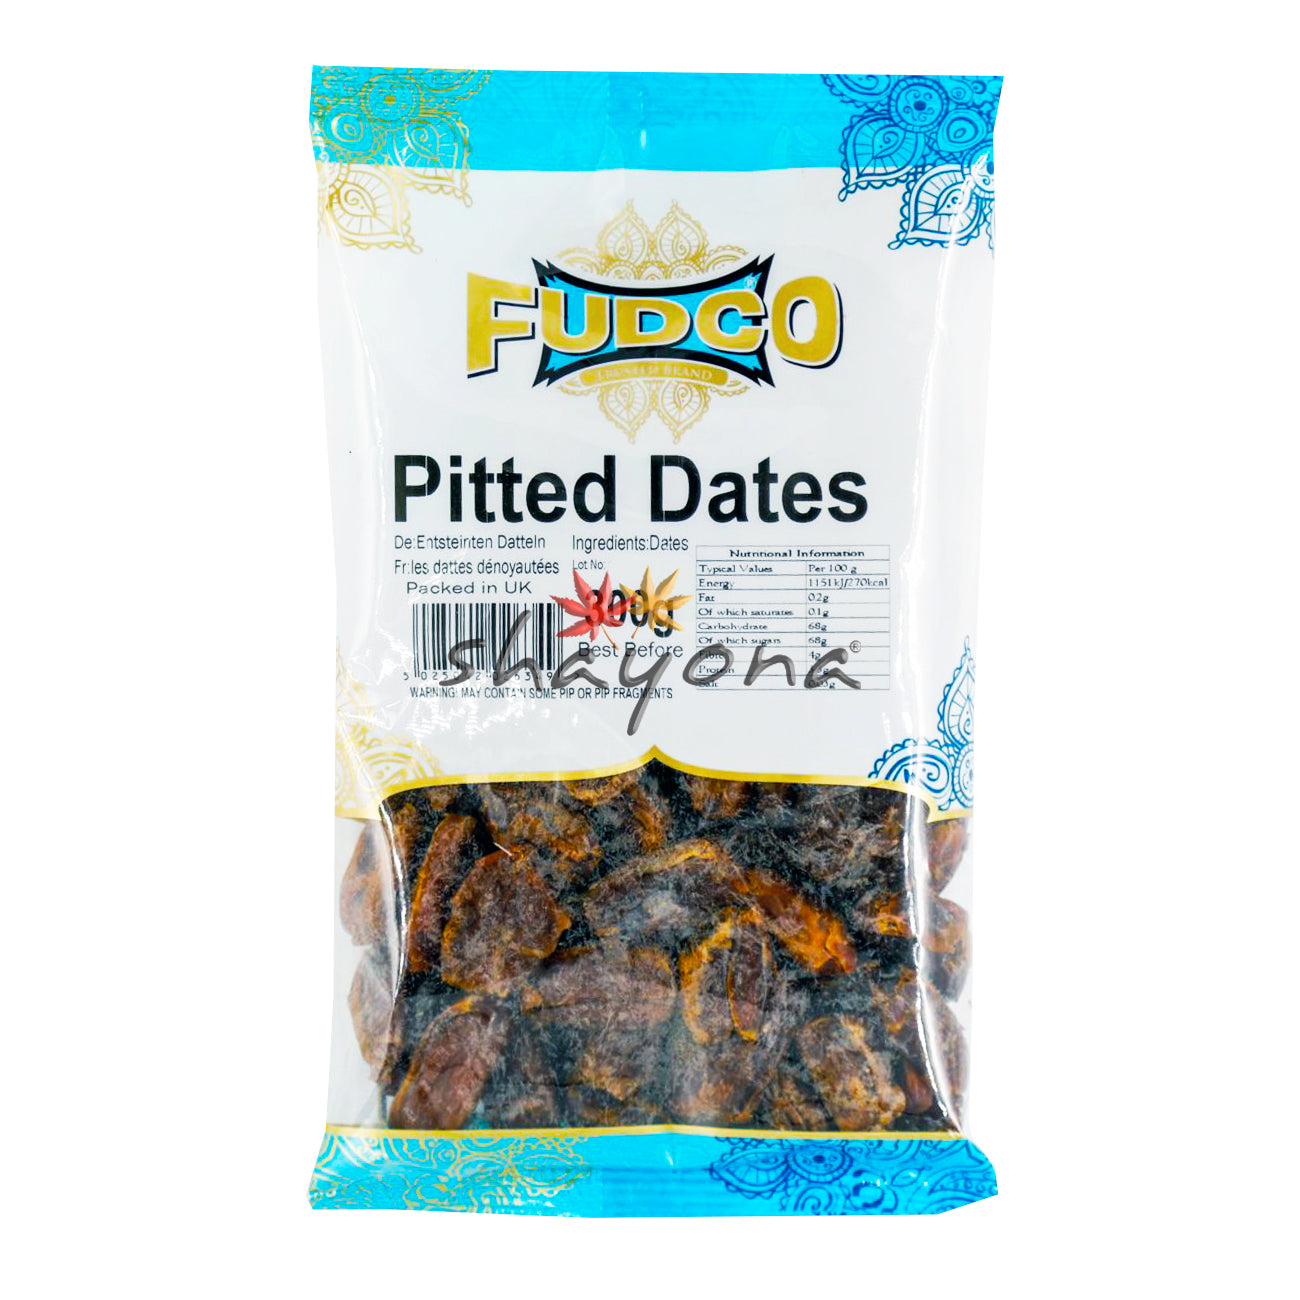 Fudco Pitted Dates